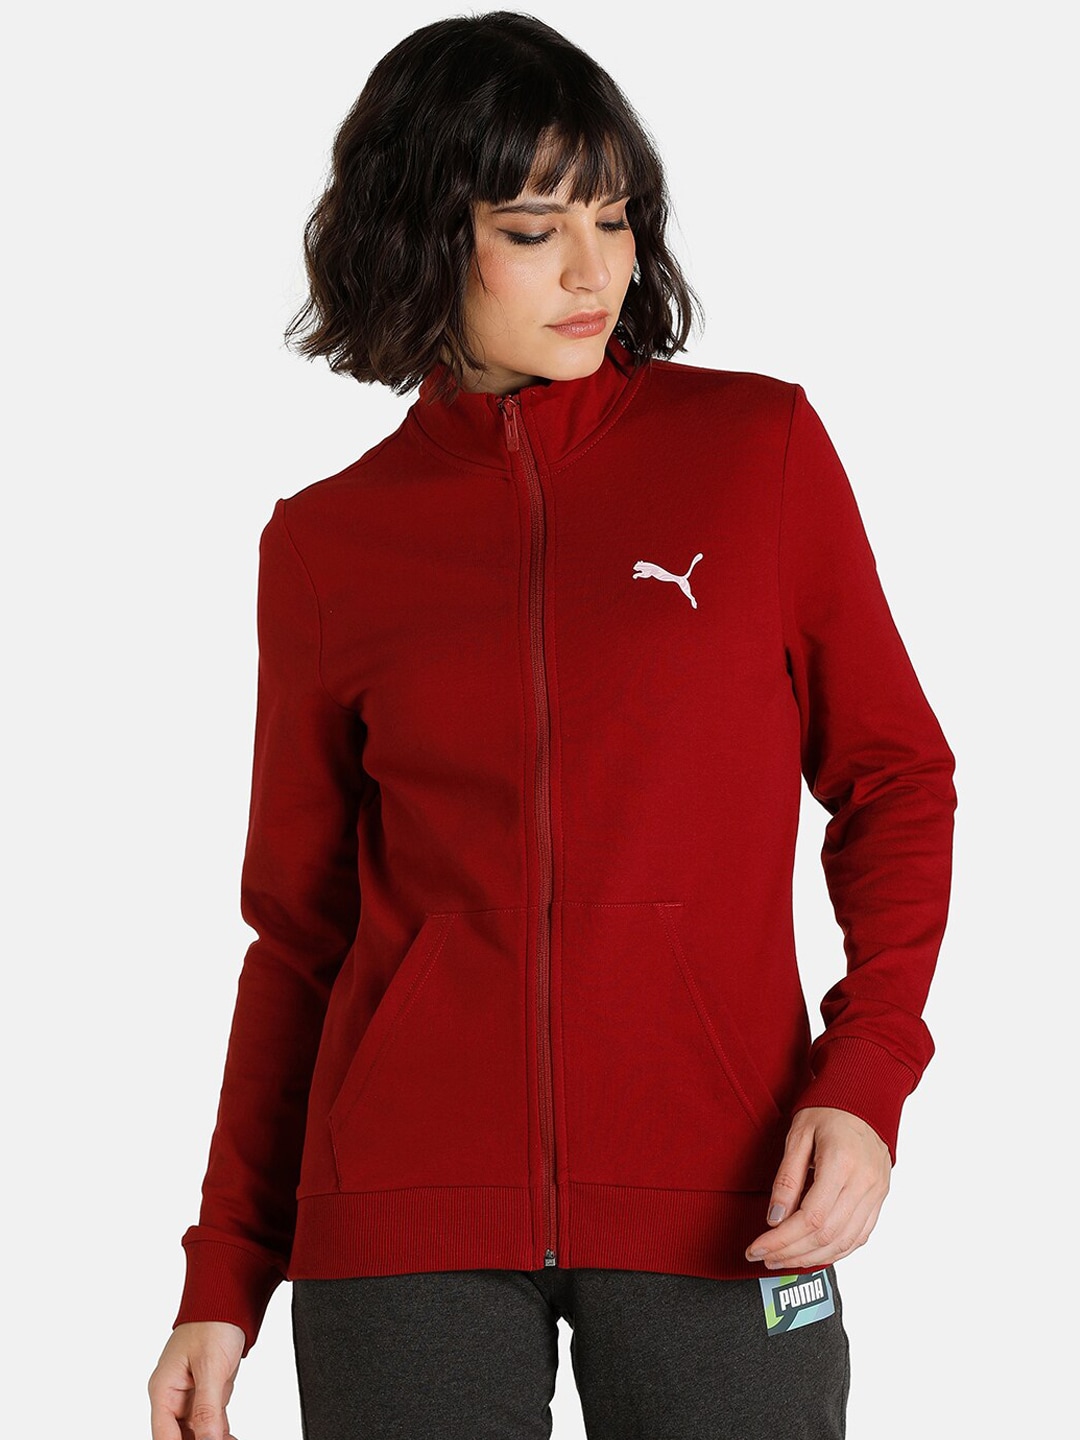 Puma Women Red Printed Cotton Sporty Jackets Price in India